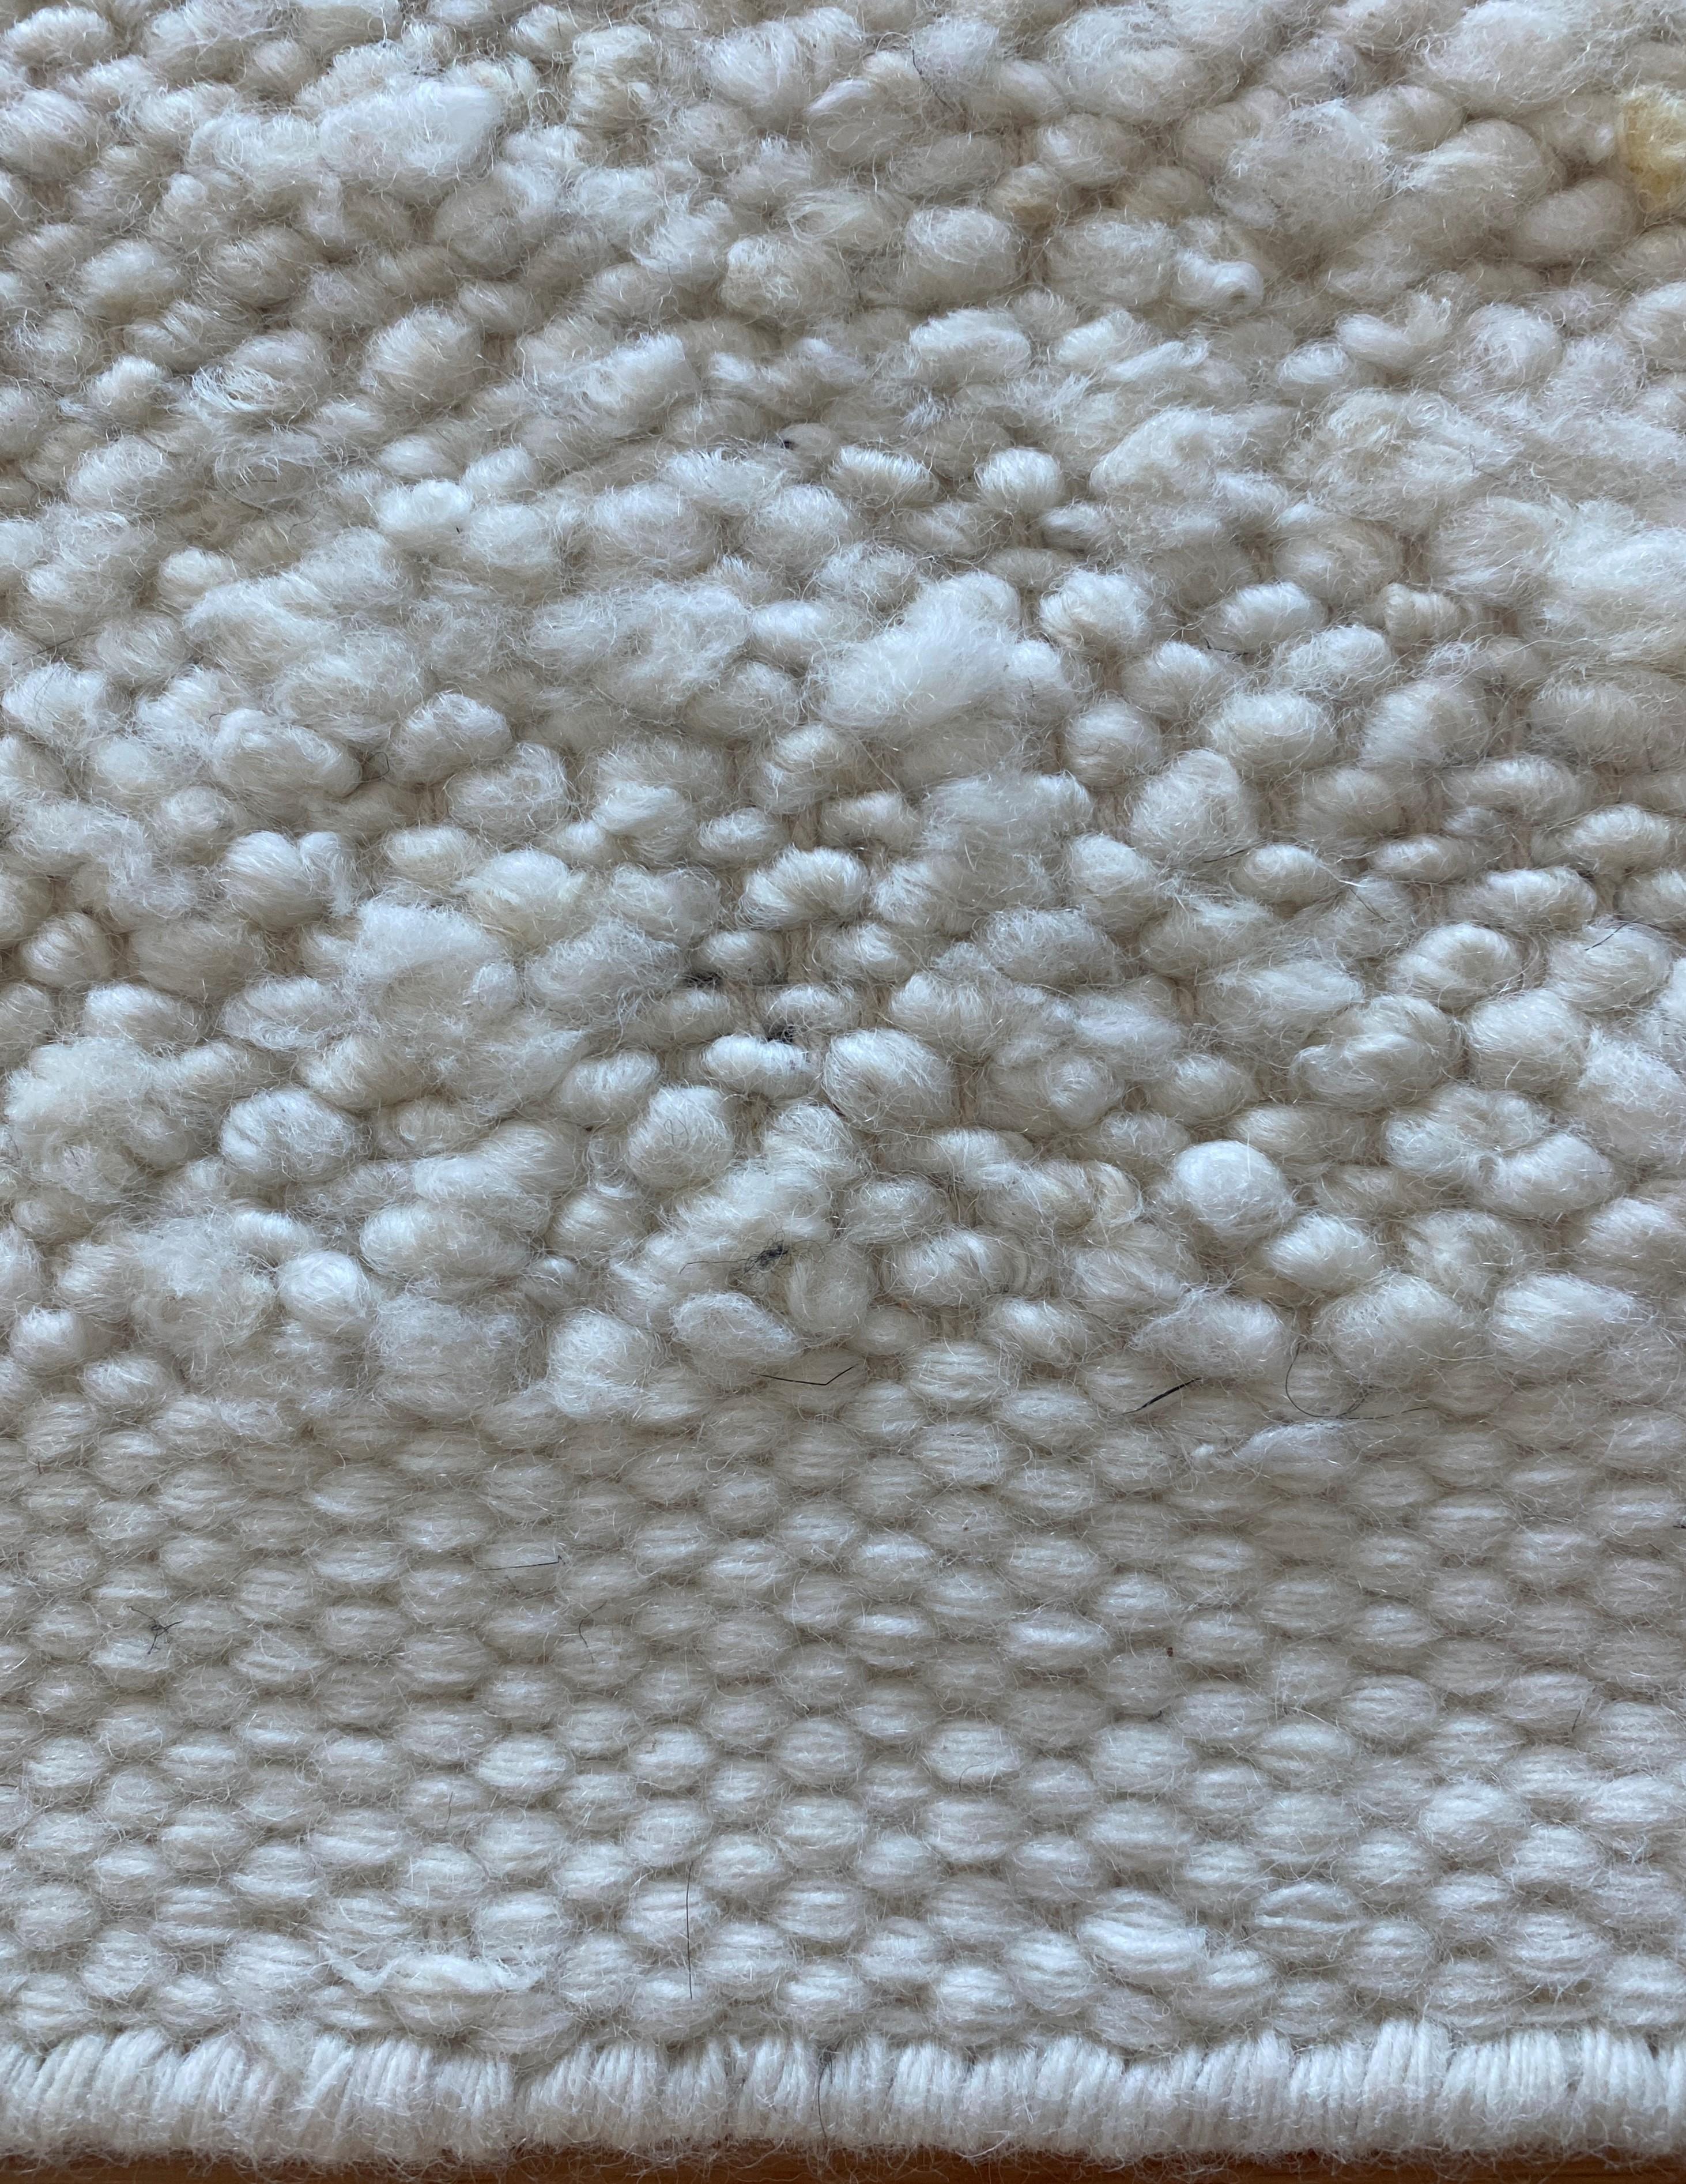 Hand-Crafted Snow Rug - Wool Off White Cream Plain Carpet with structure hand woven For Sale